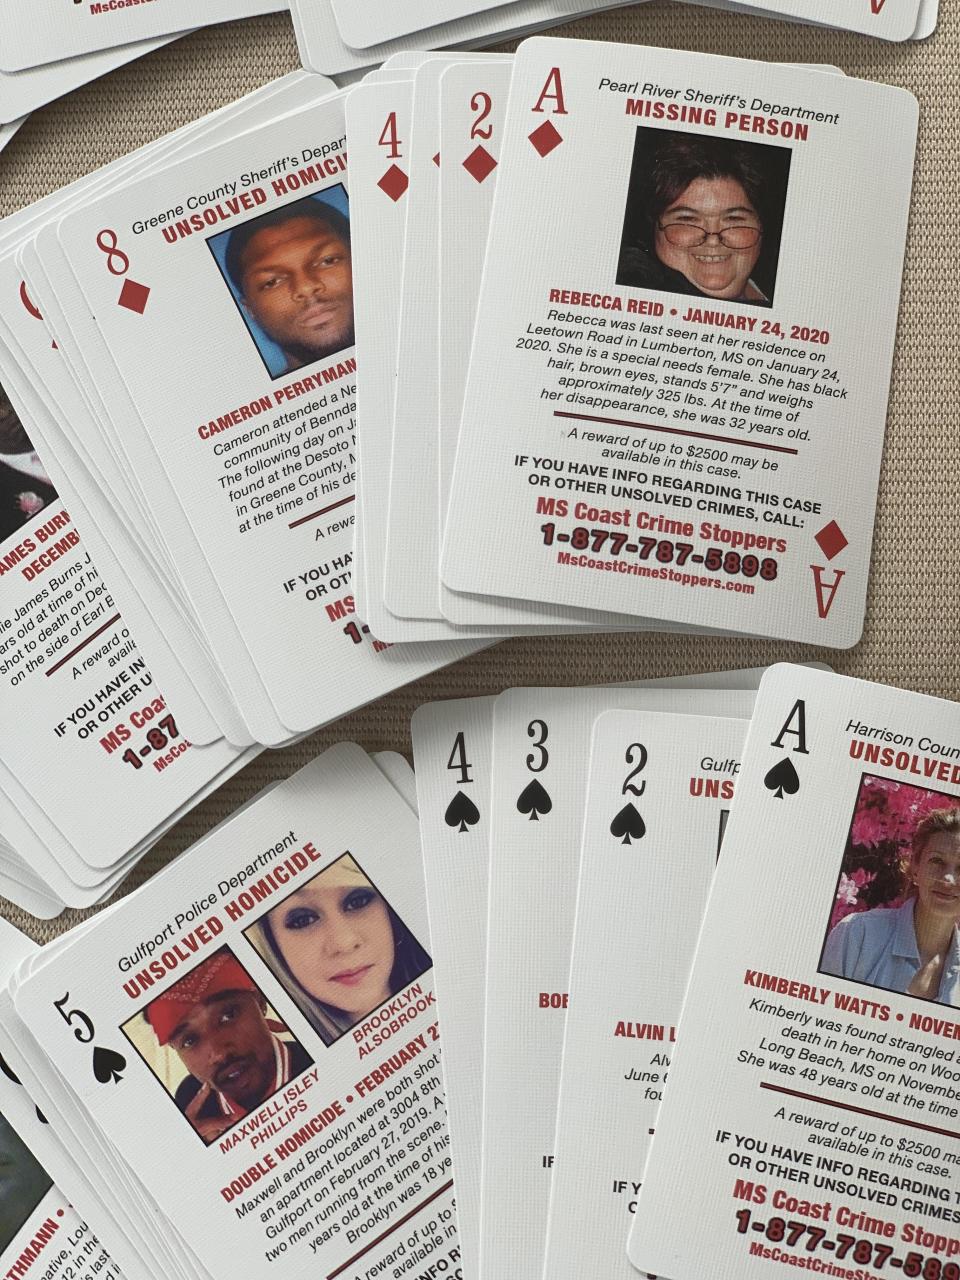 Cold case playing cards distributed by the Mississippi Coast Crime Stoppers. / Credit: Mississippi Coast Crime Stoppers